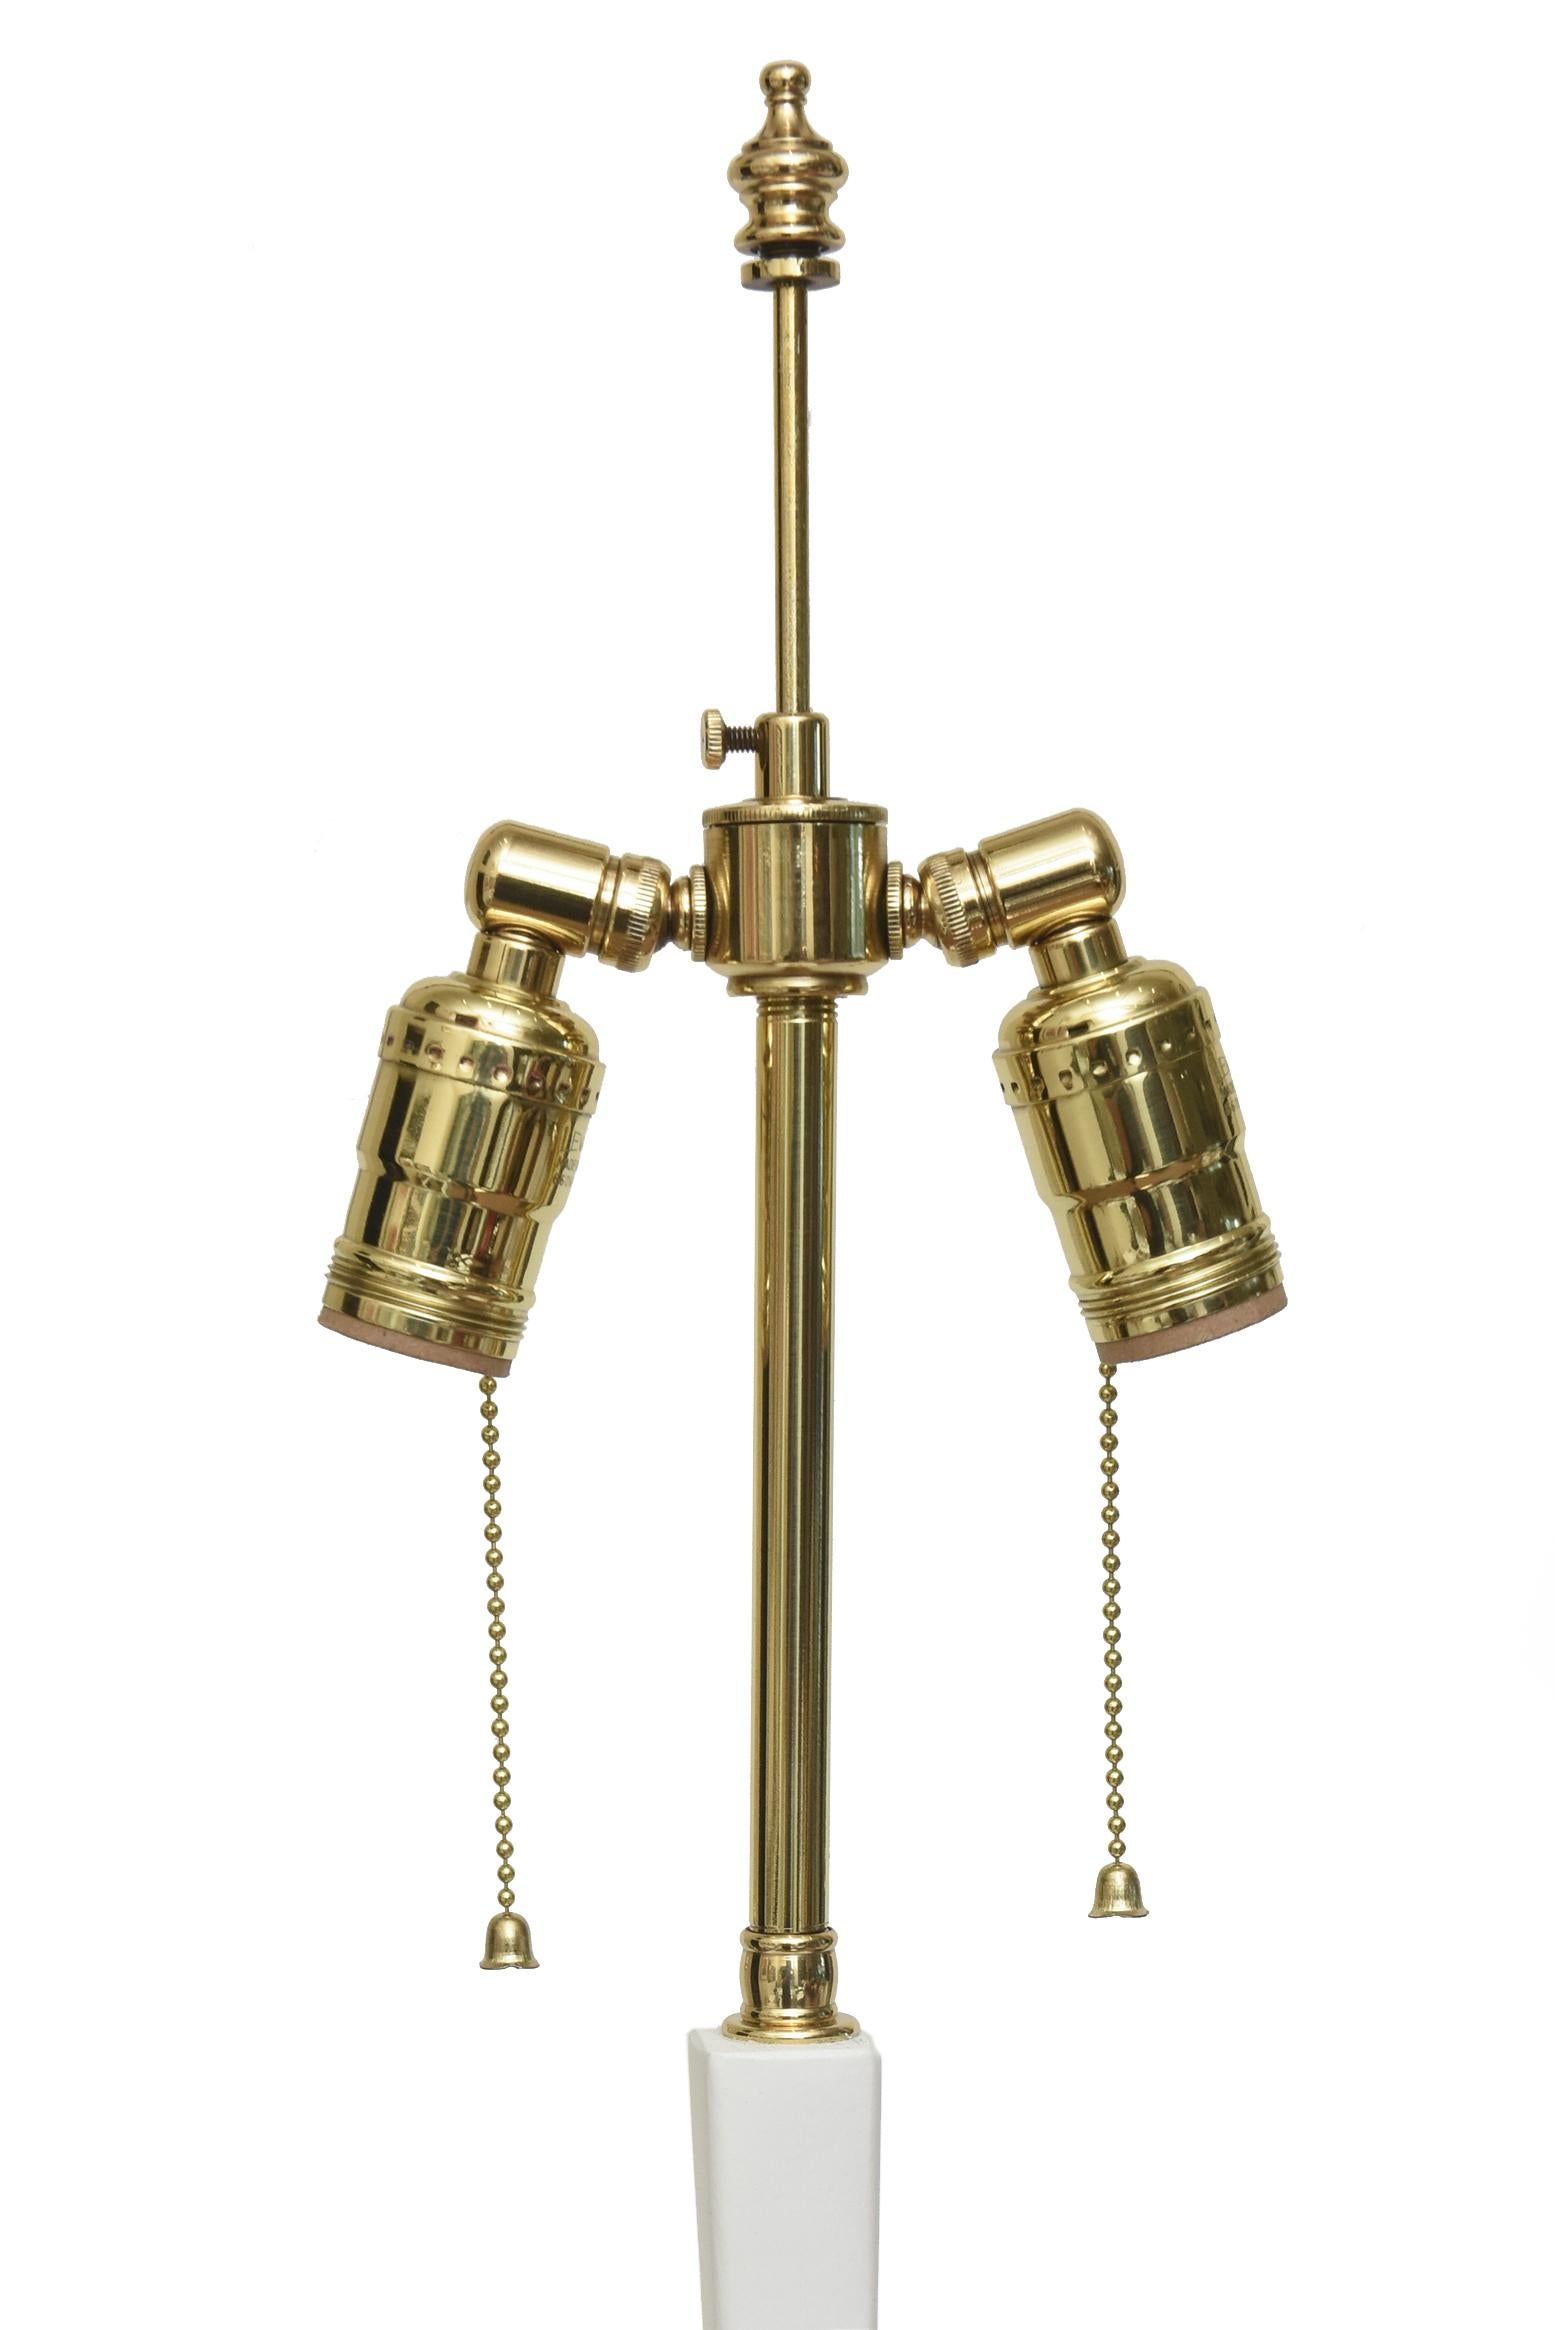 Vintage Sirmos Wood Rams Head Floor Lamp with Tripod Feet and Brass Fittings In Good Condition For Sale In North Miami, FL